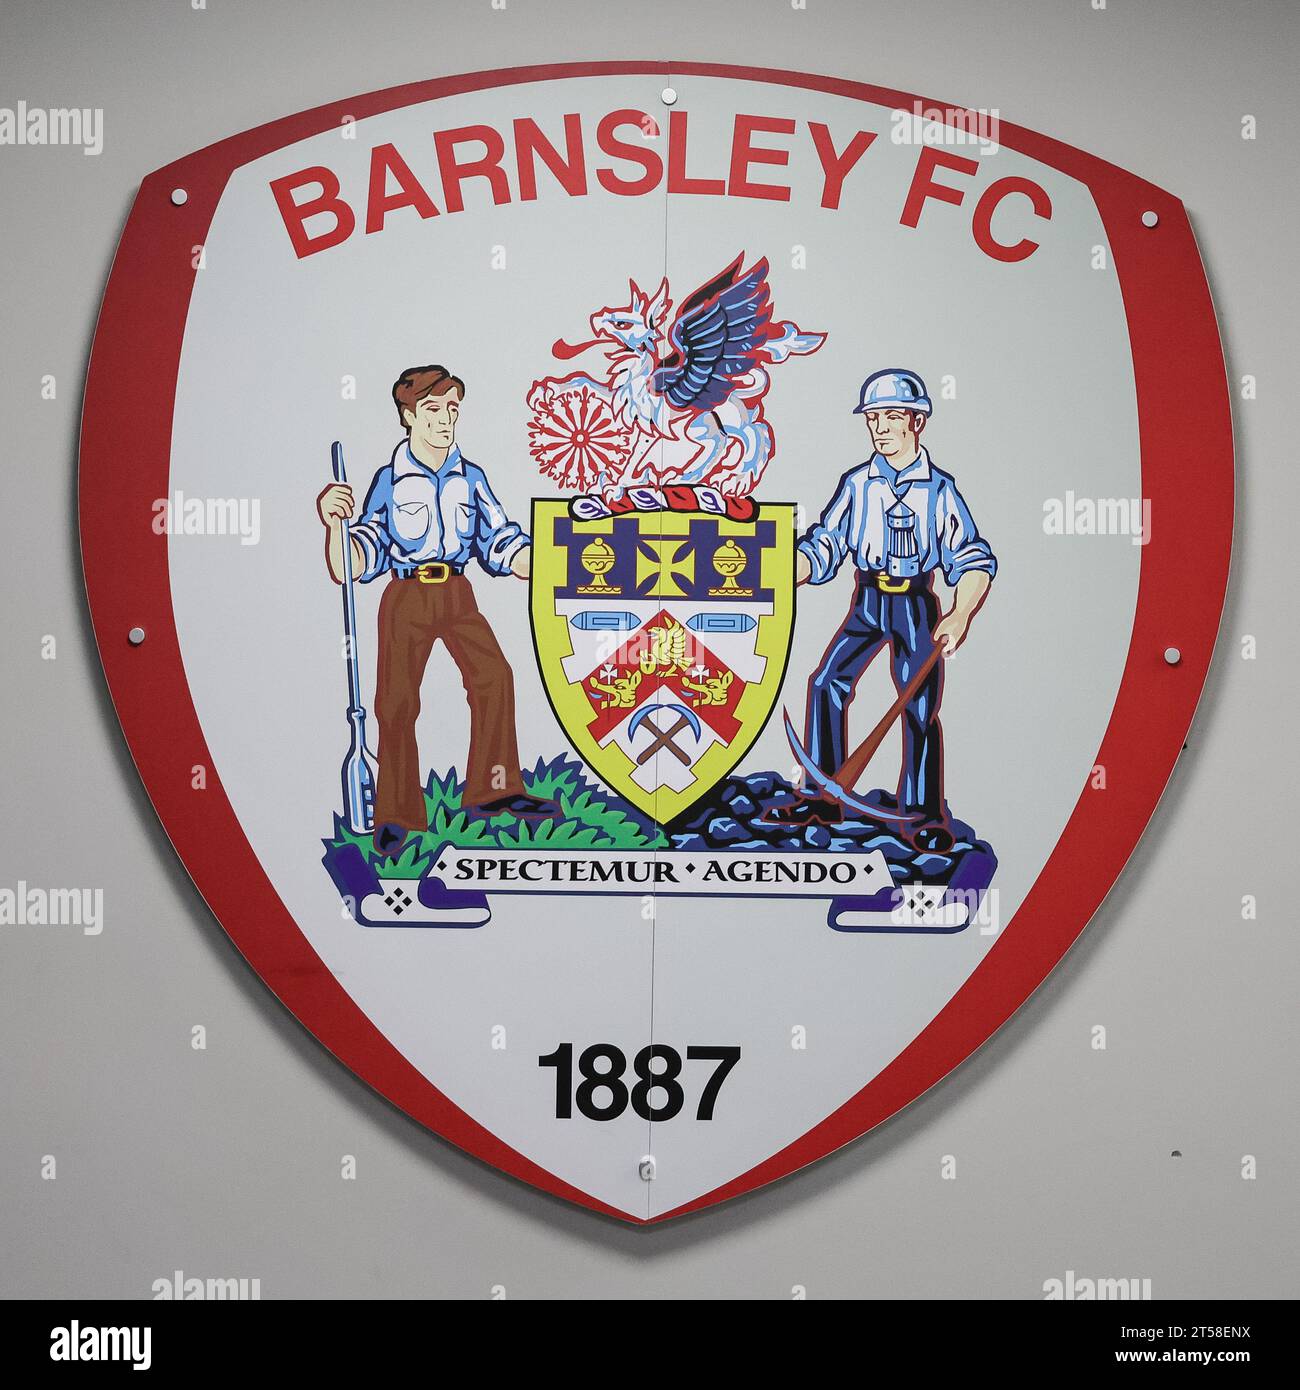 Barnsley FC logo in the tunnel area during the Emirates FA Cup match Barnsley vs Horsham FC at Oakwell, Barnsley, United Kingdom. 3rd Nov, 2023. (Photo by Mark Cosgrove/News Images) in Barnsley, United Kingdom on 11/3/2023. (Photo by Mark Cosgrove/News Images/Sipa USA) Credit: Sipa USA/Alamy Live News Stock Photo